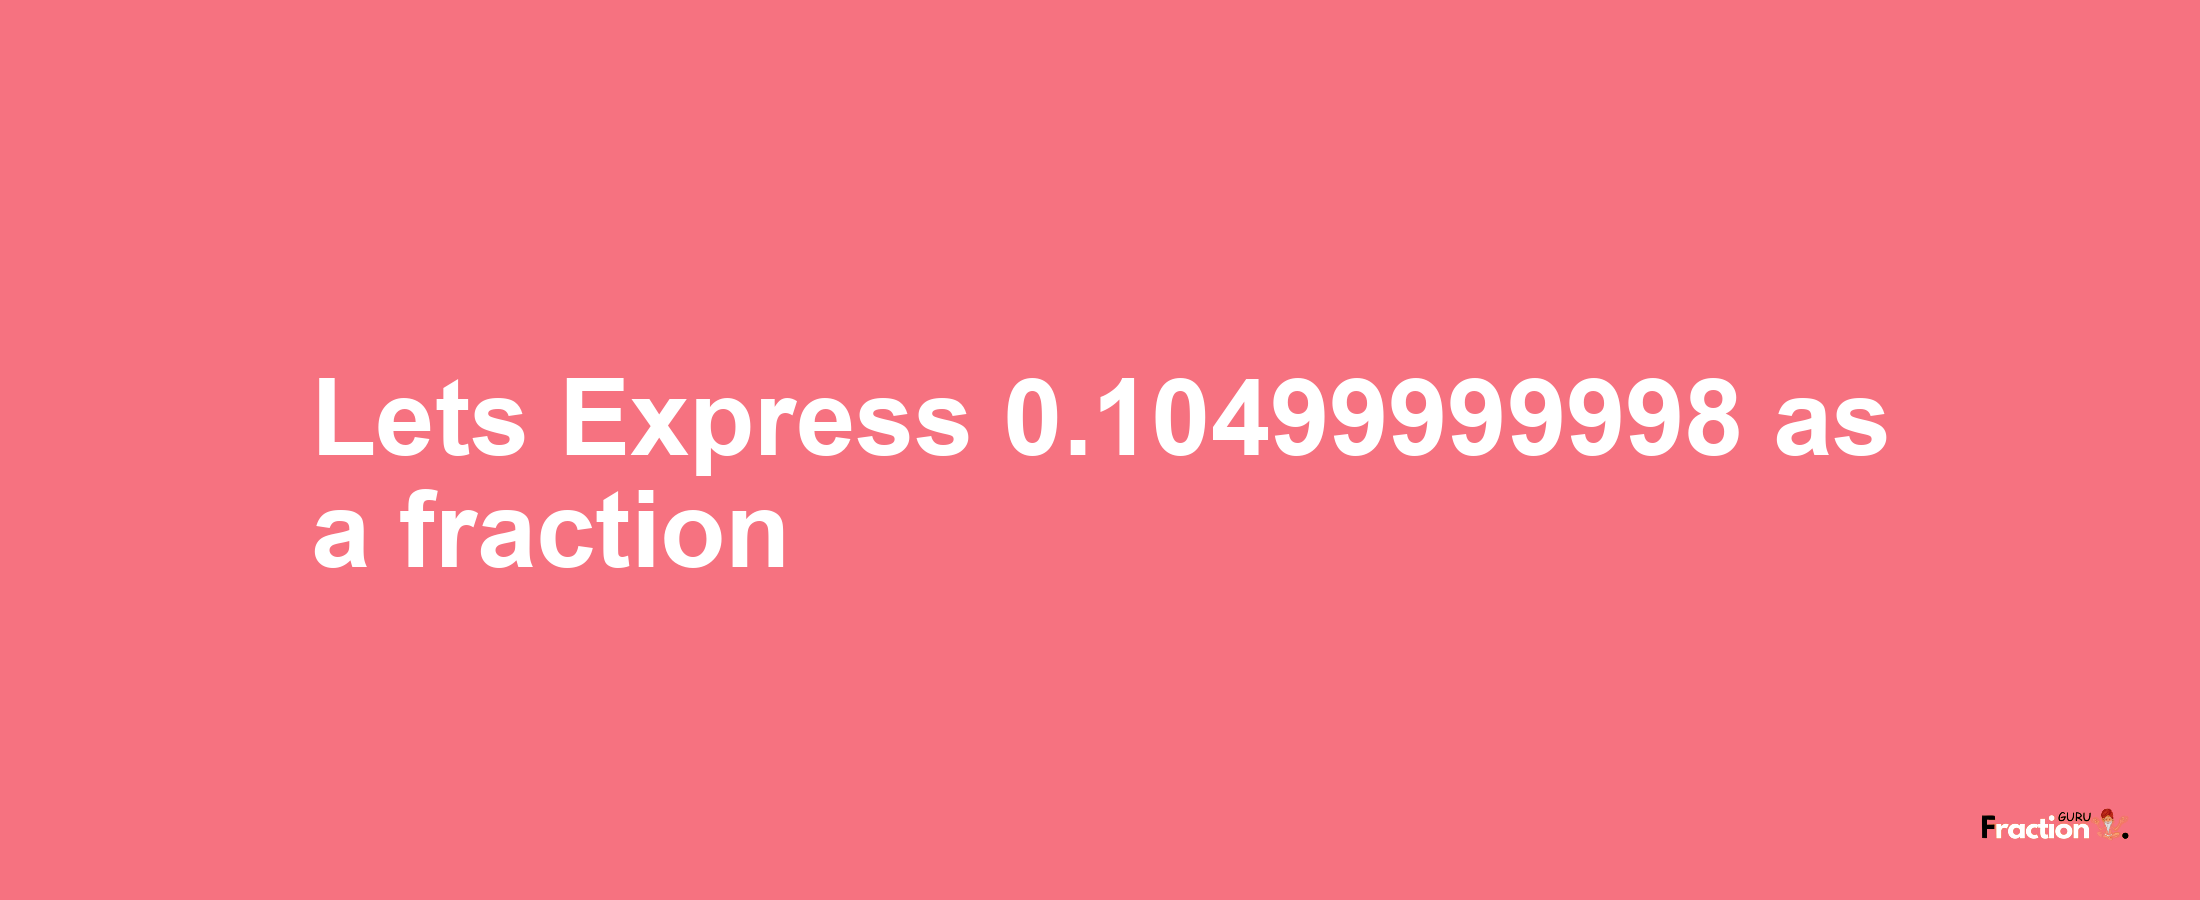 Lets Express 0.10499999998 as afraction